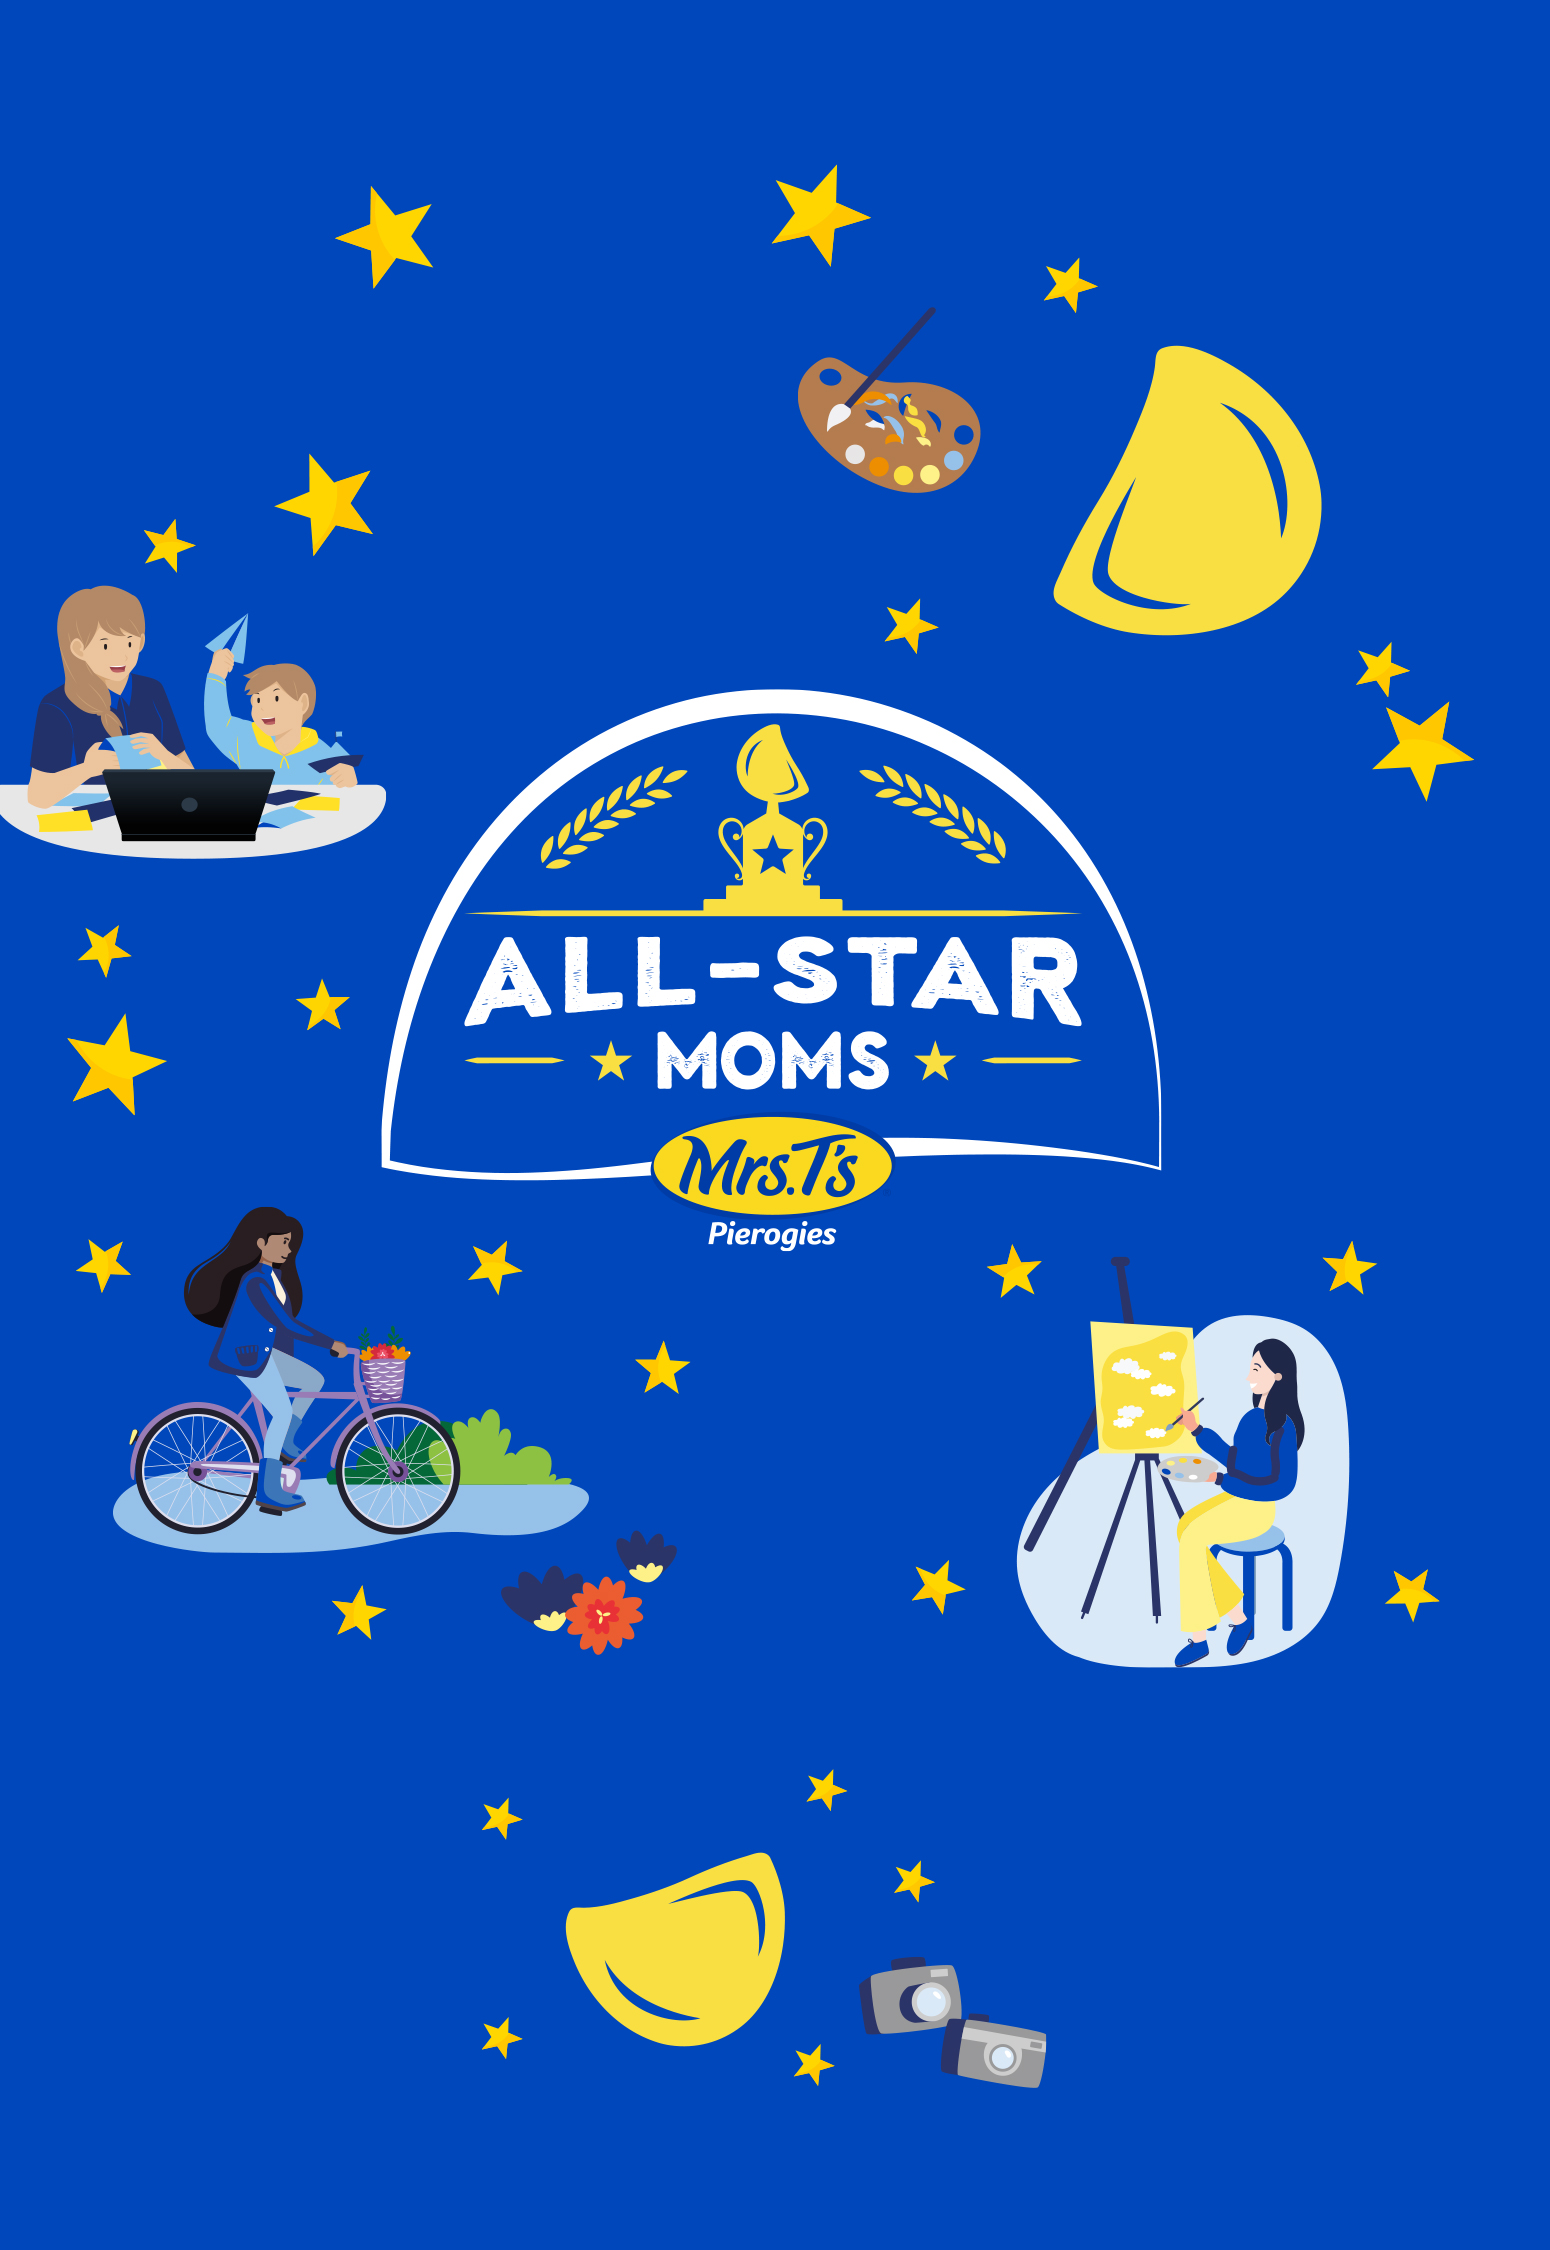 All-Star Moms Program: Fuel your passions